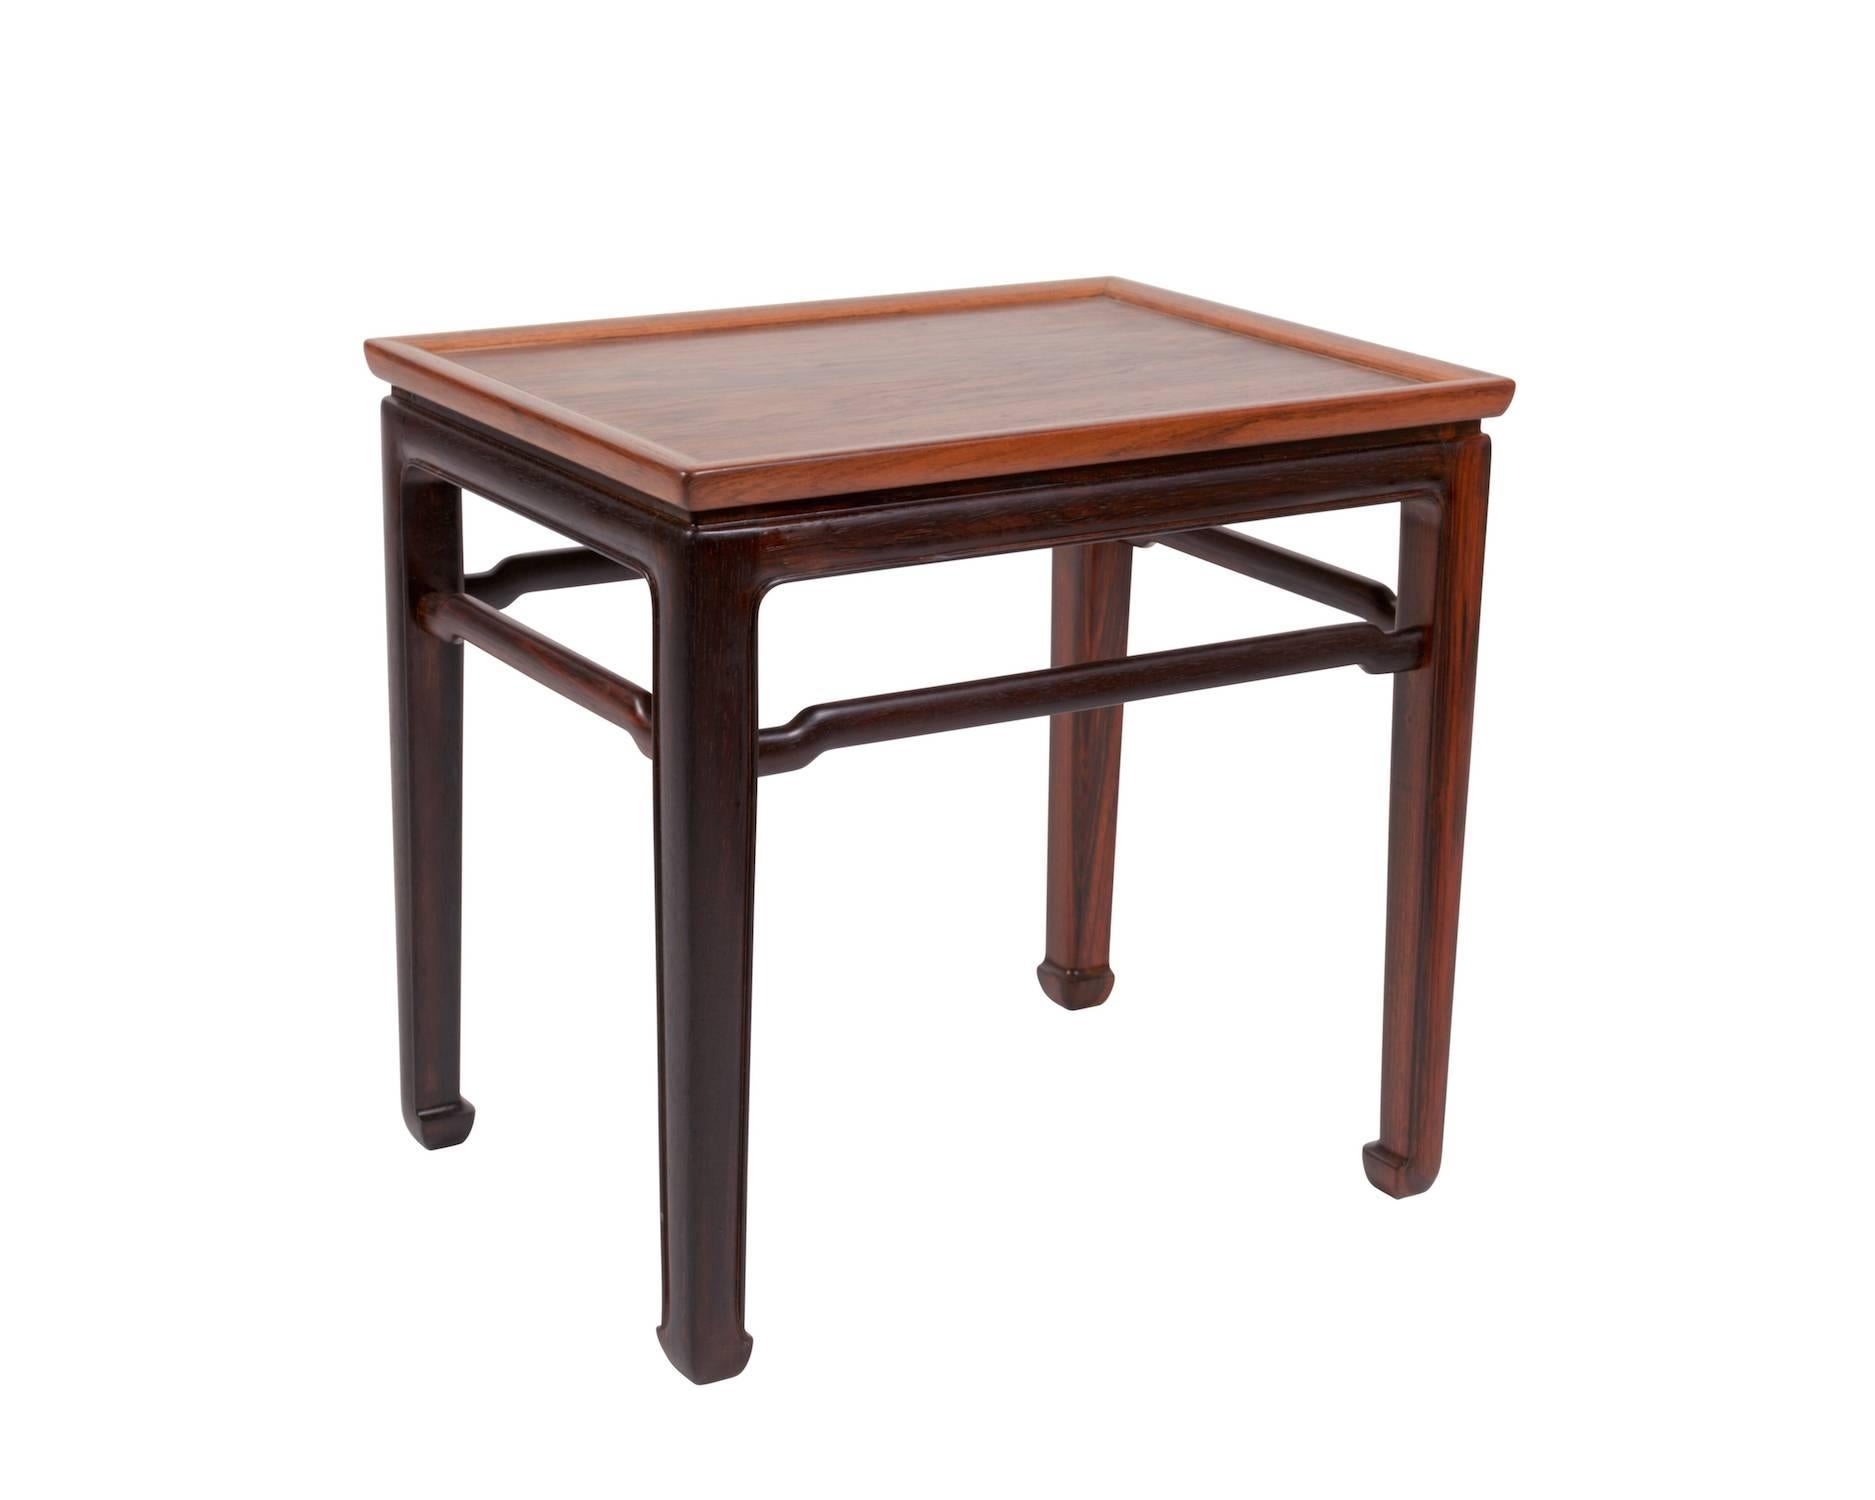 A pair of rosewood side tables in Chinese manner. 

Designed and manufactured by Jacob Kjær.